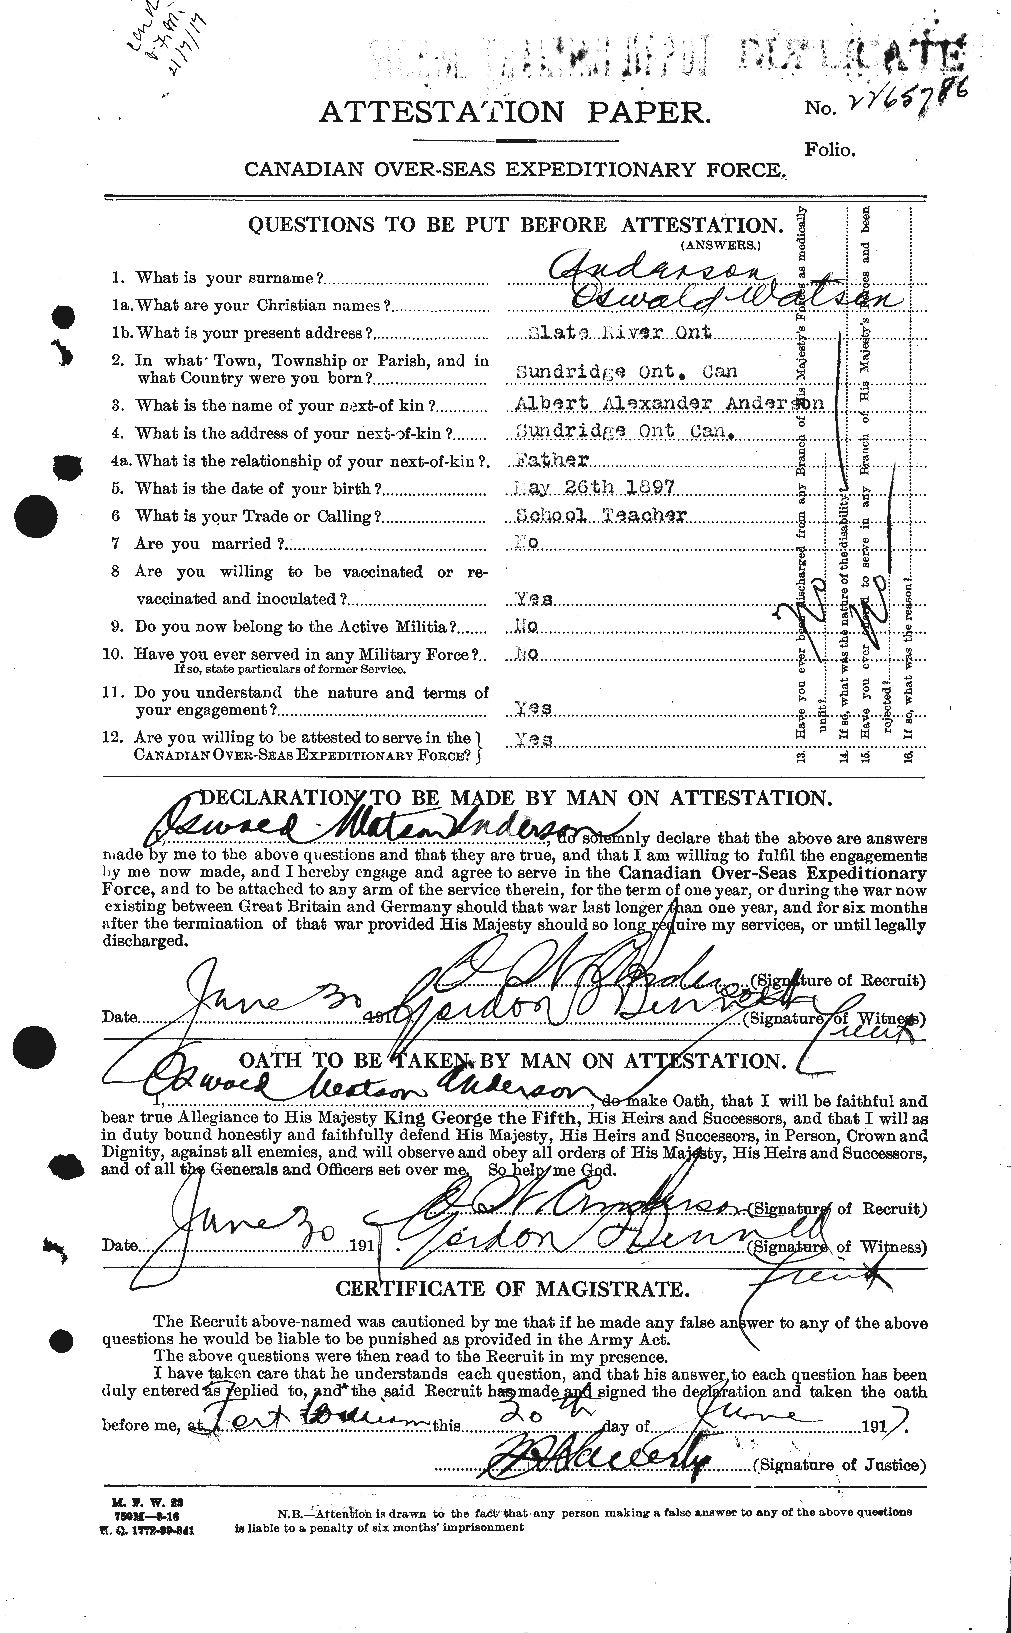 Personnel Records of the First World War - CEF 207374a